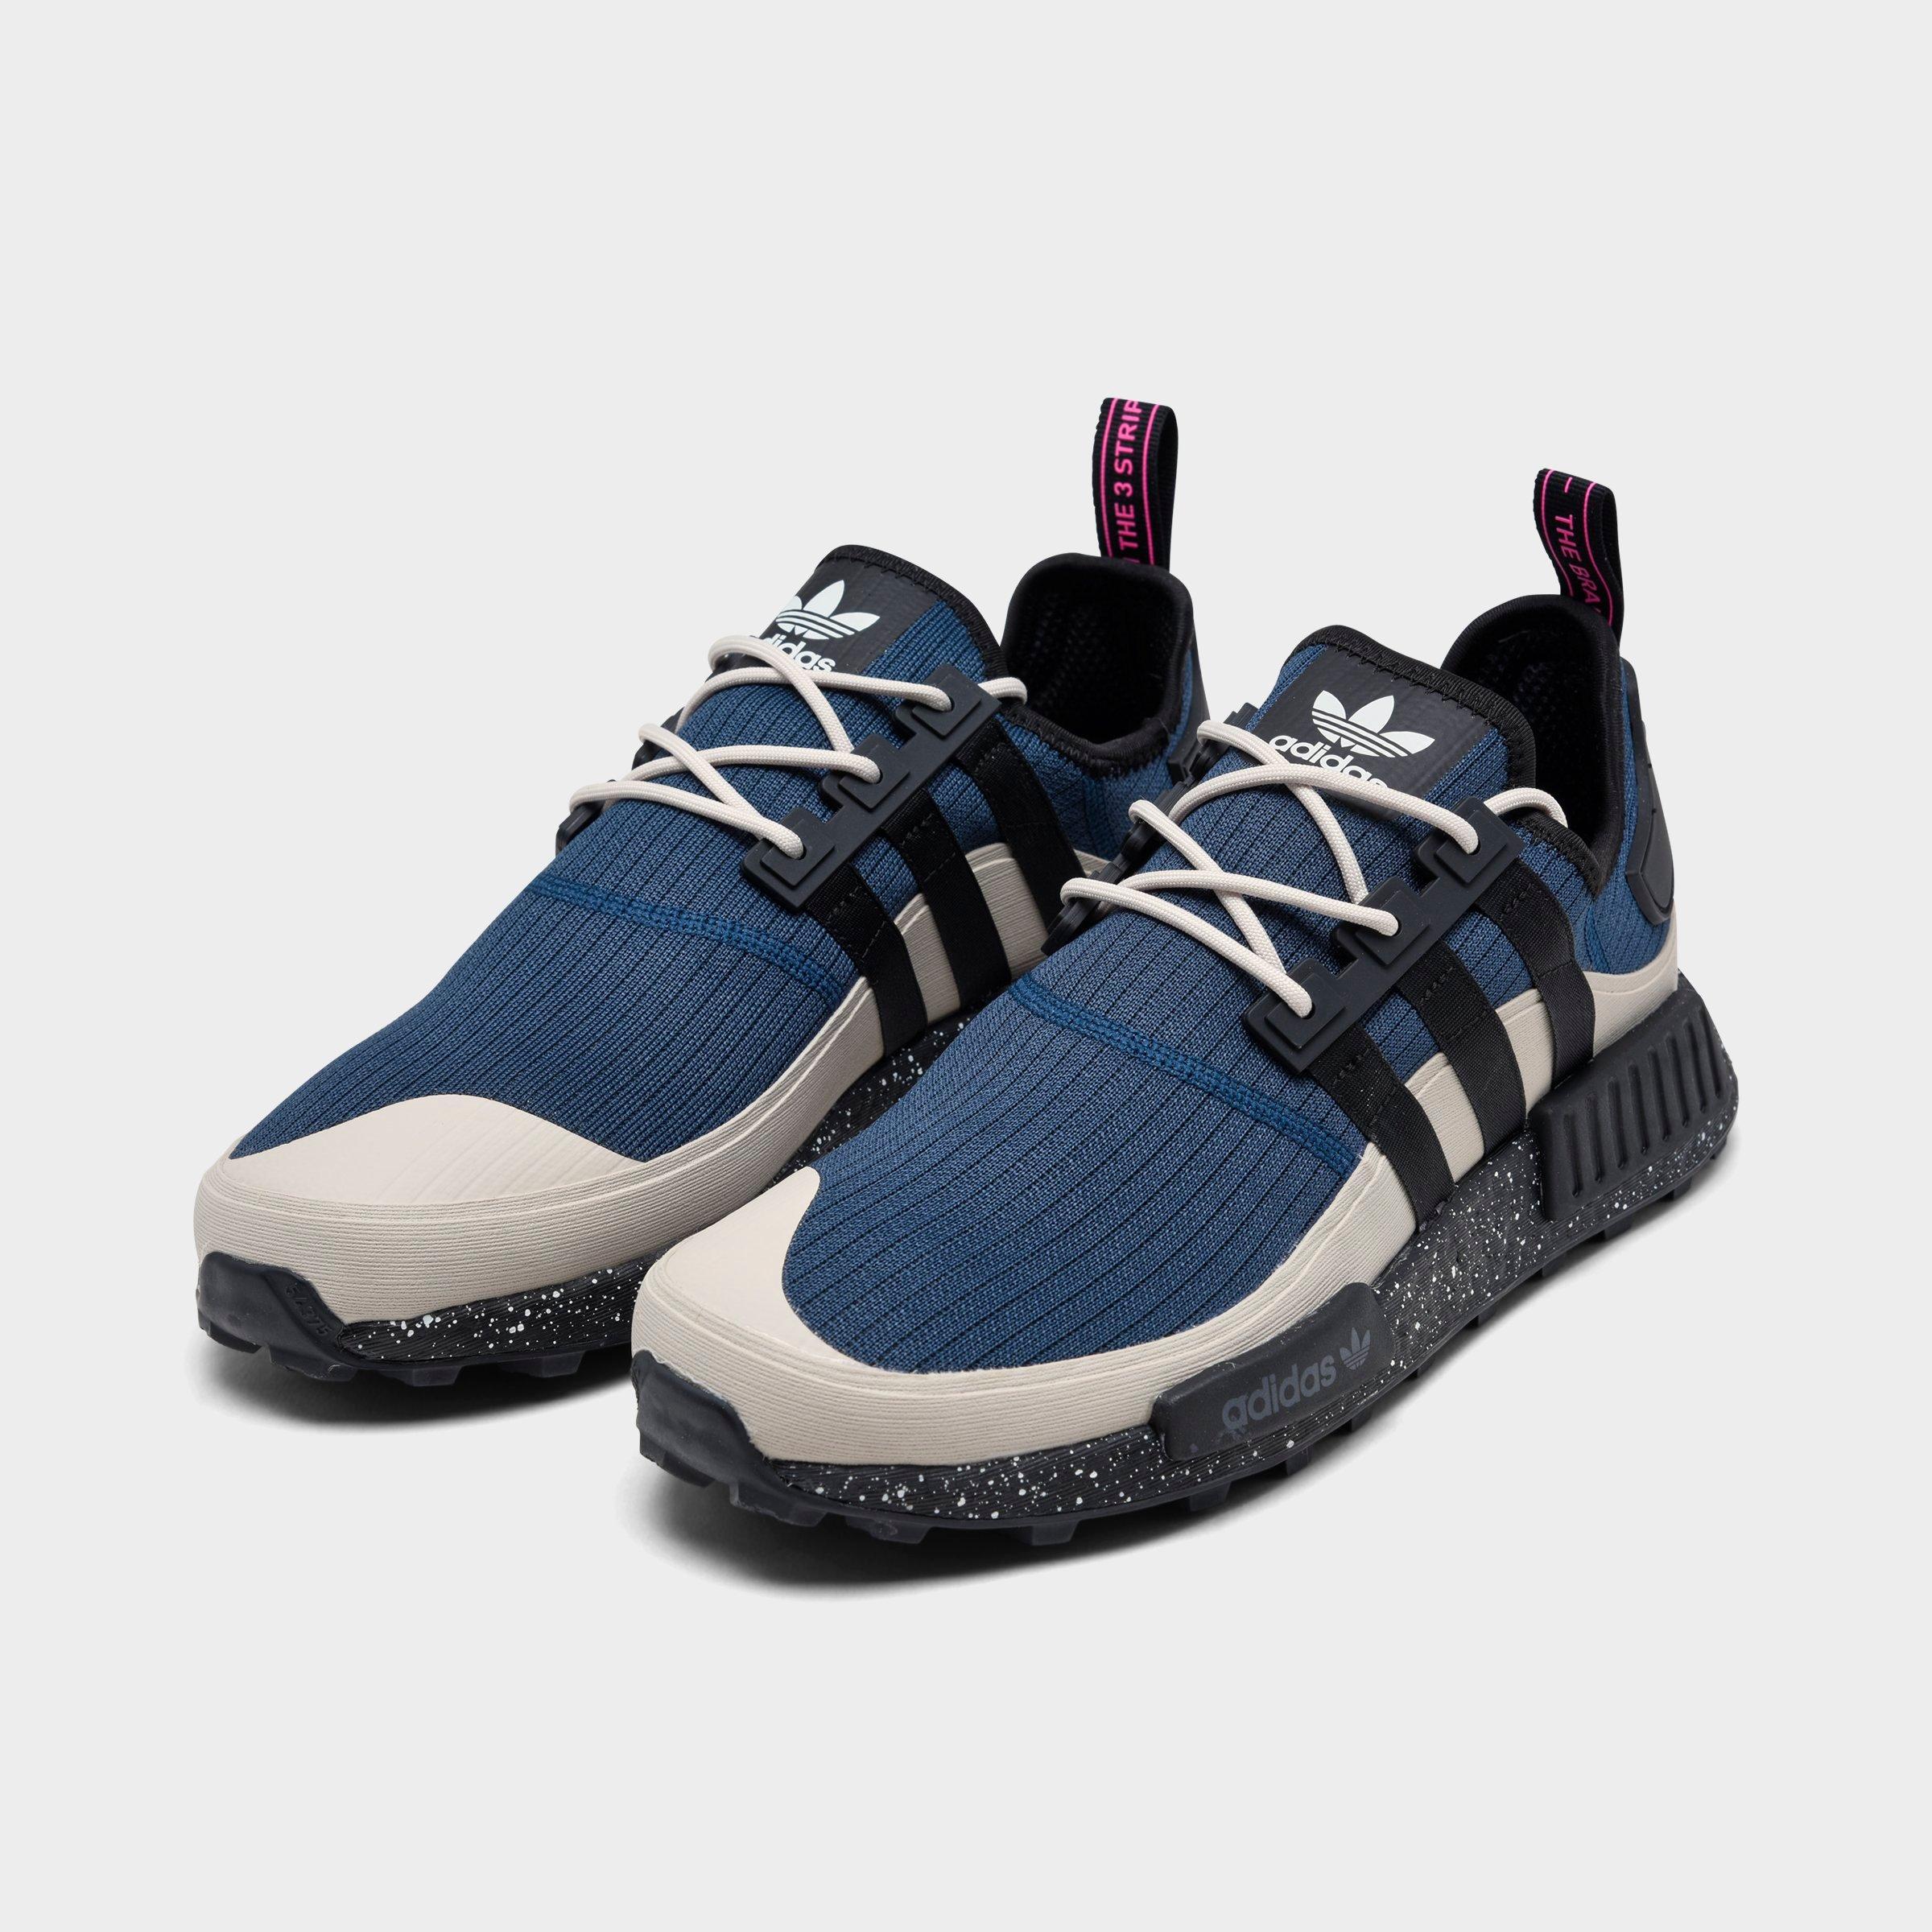 can nmds be used for running